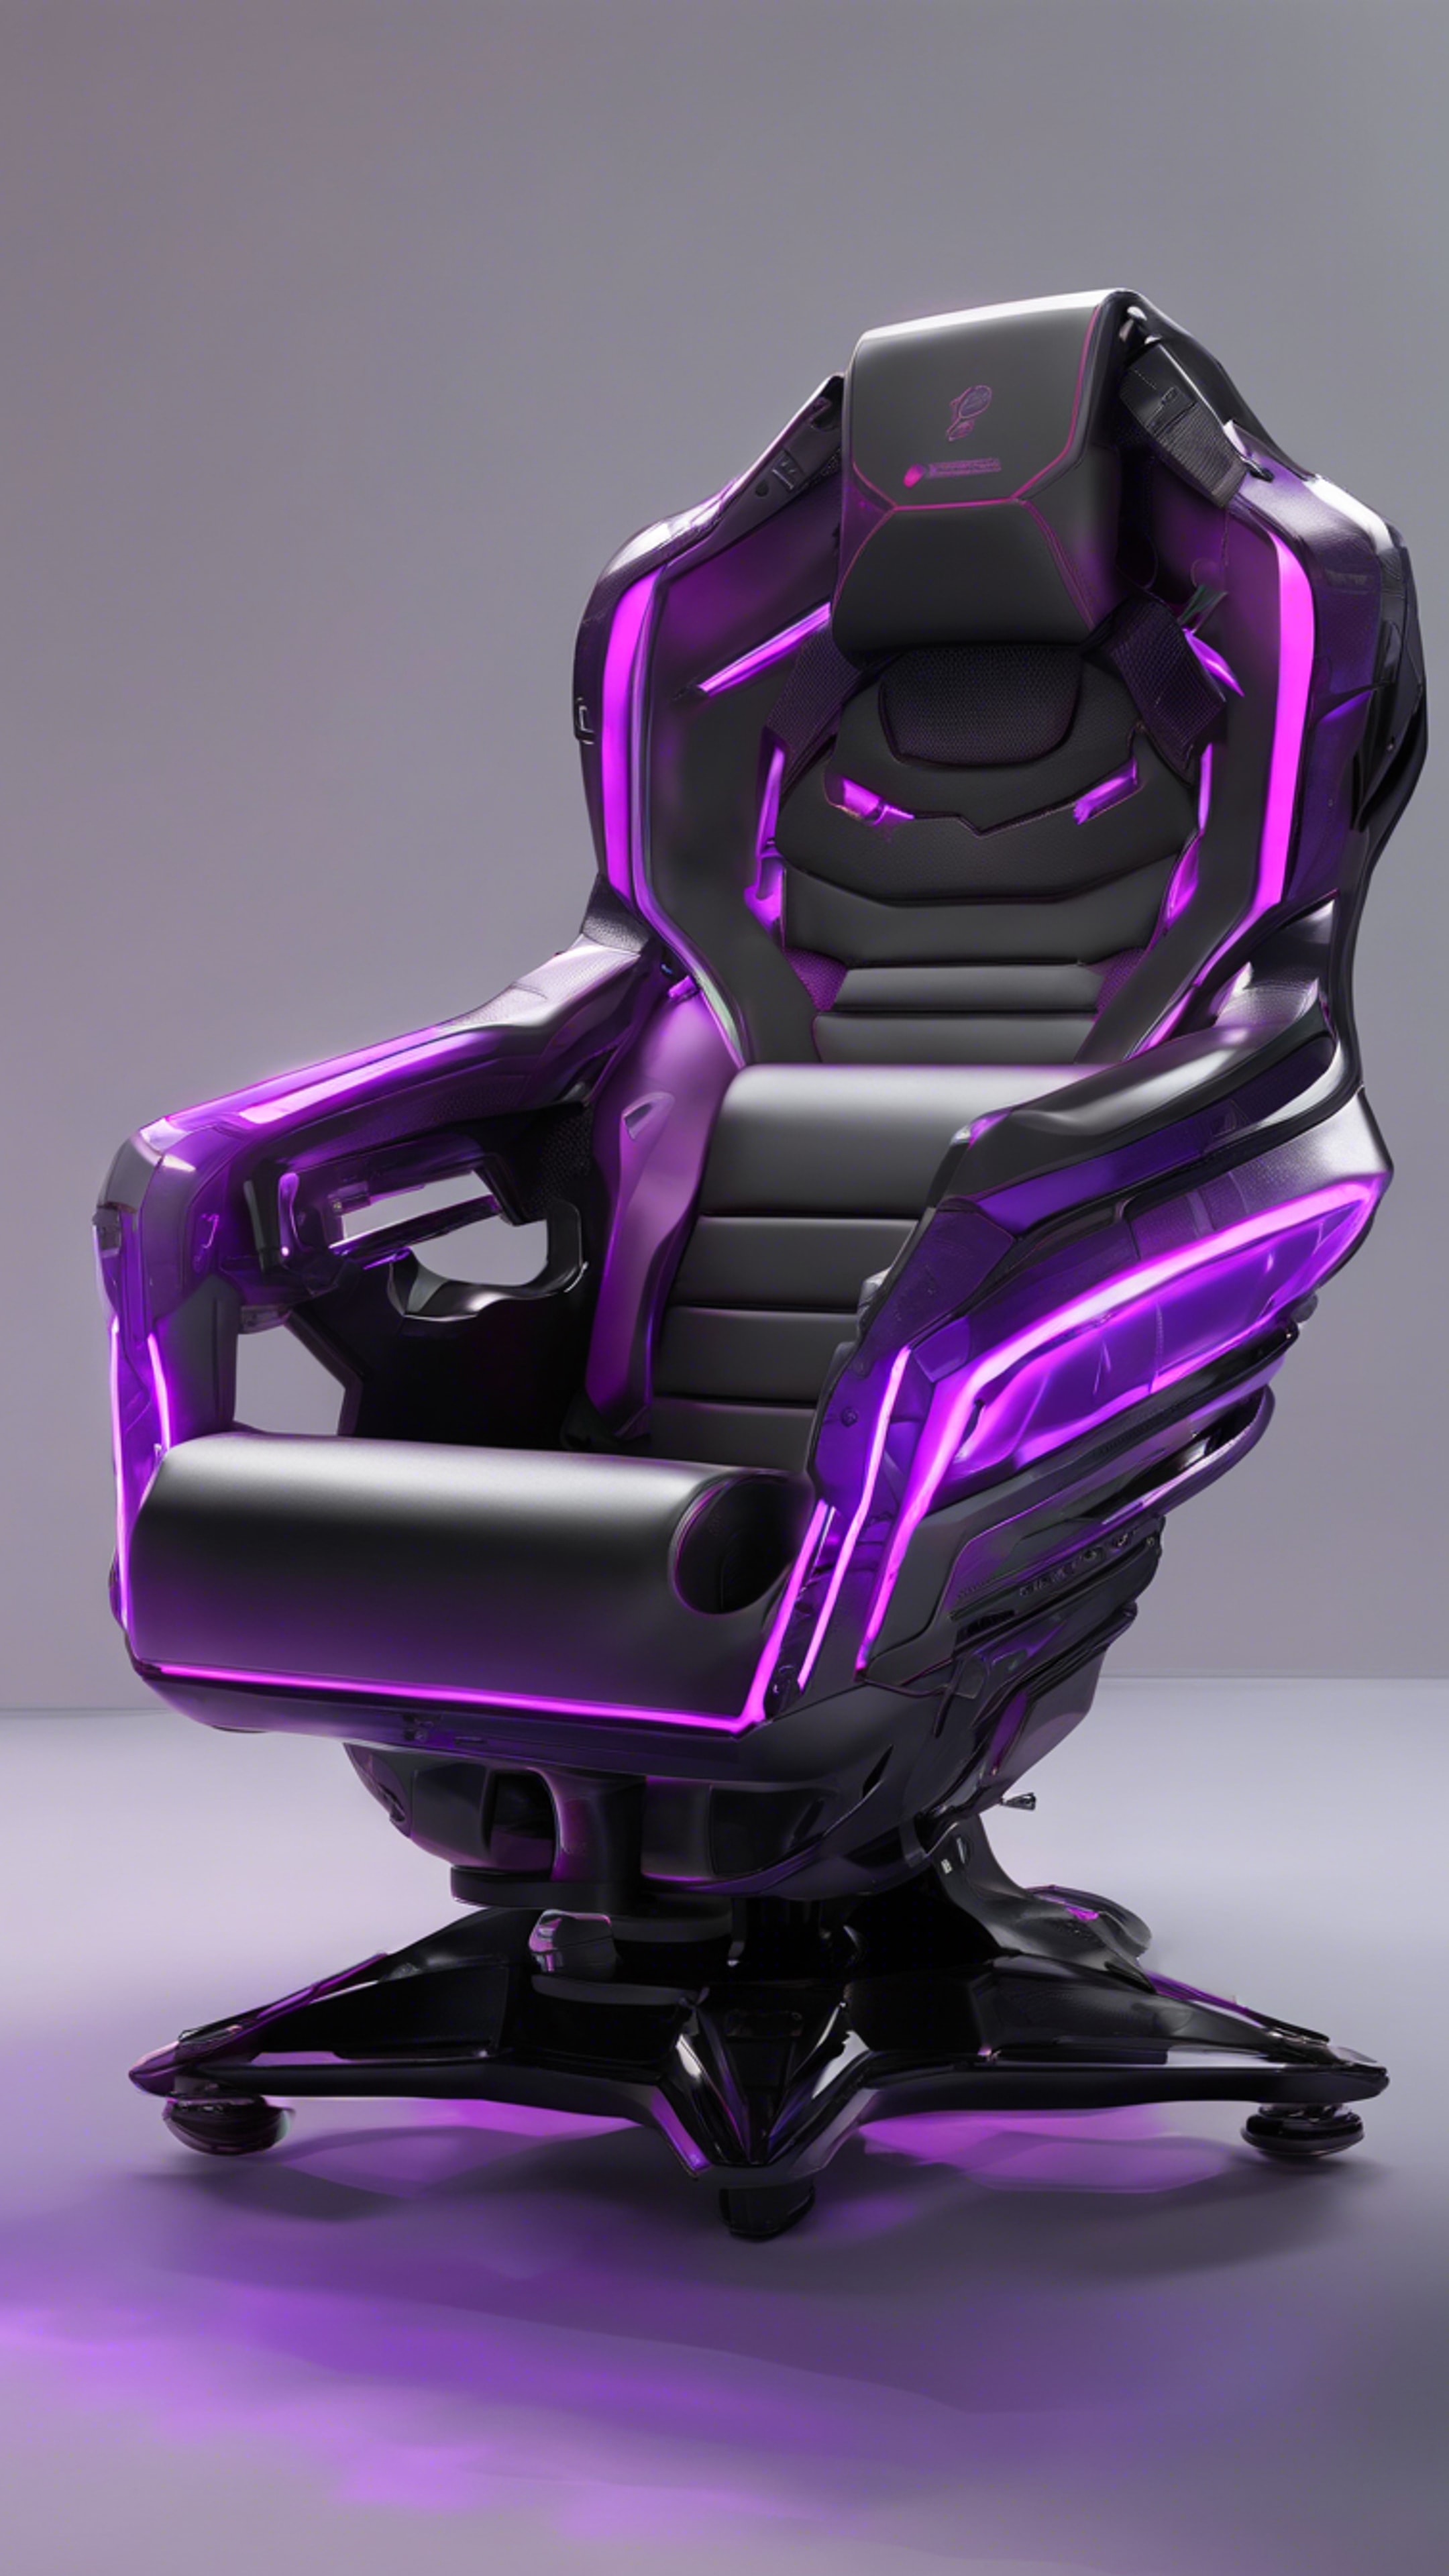 A futuristic gaming chair, jet black with neon purple accents, situated in a high-tech gaming station. Behang[77c4183ef08040e08e97]